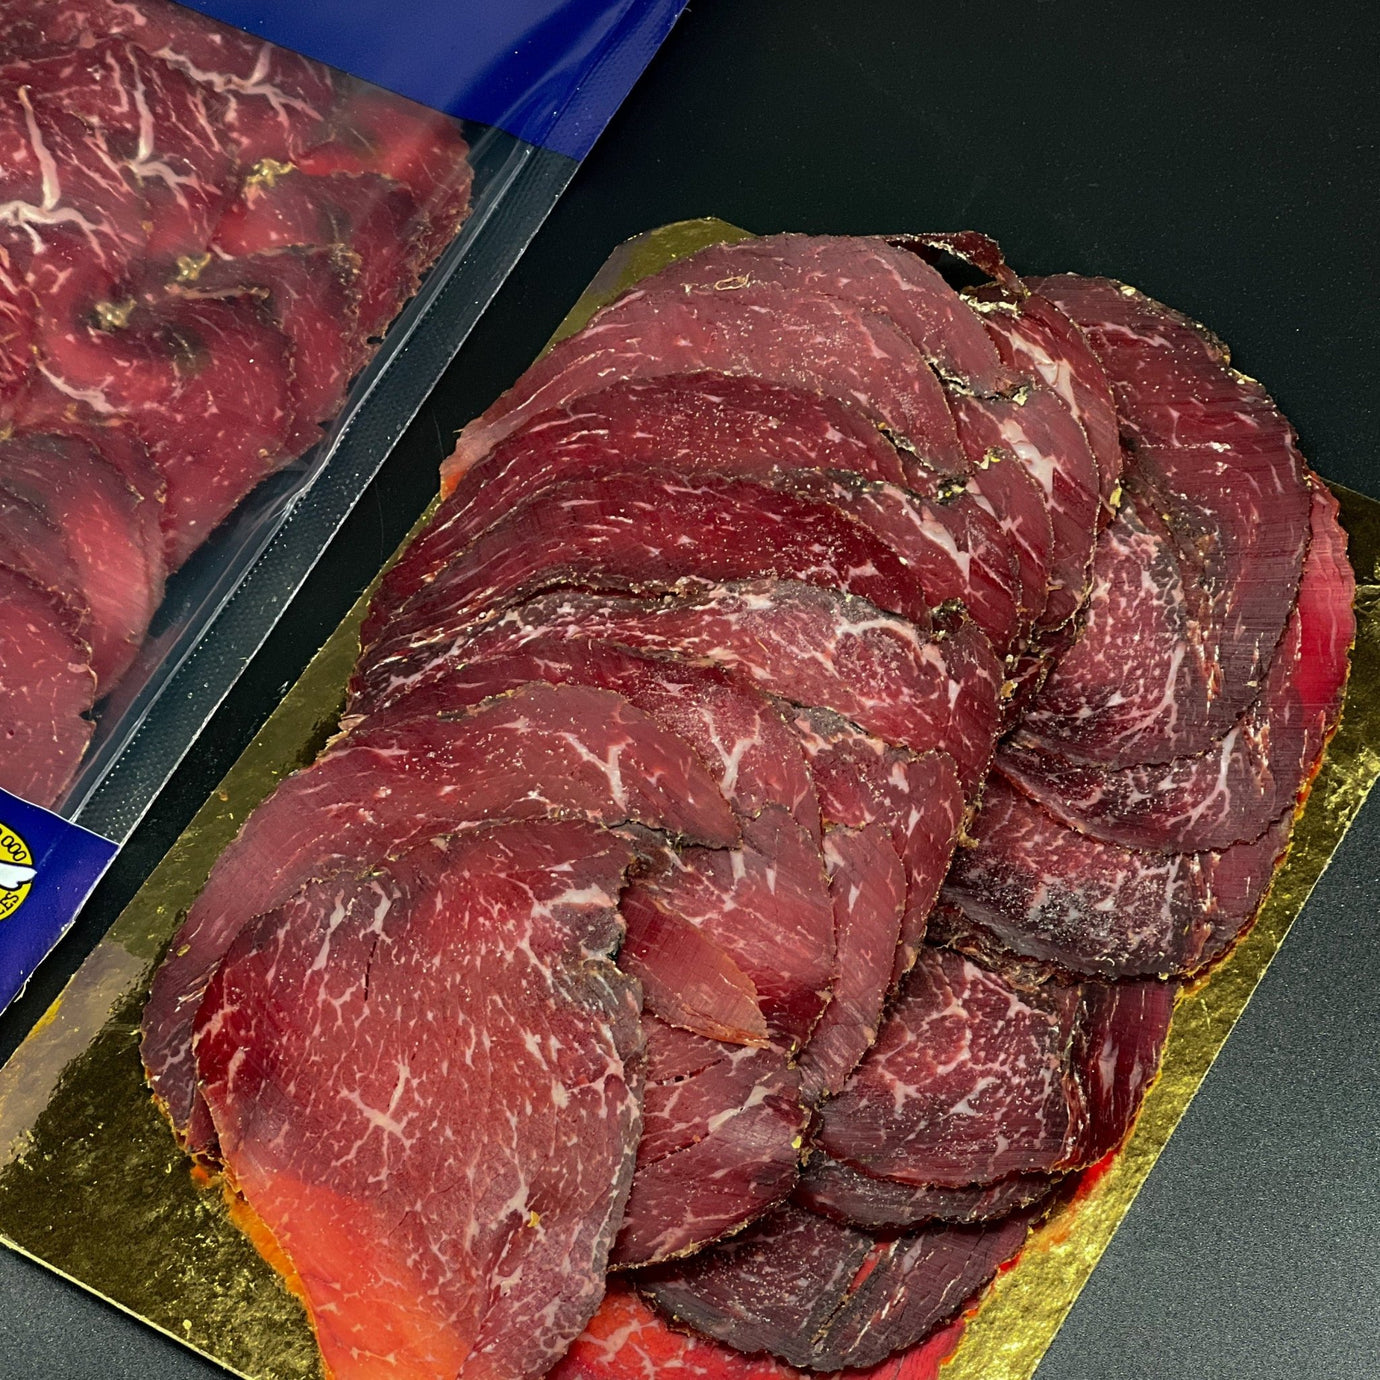 Air Dried / Cured Meats - Wild Game Meat Ltd